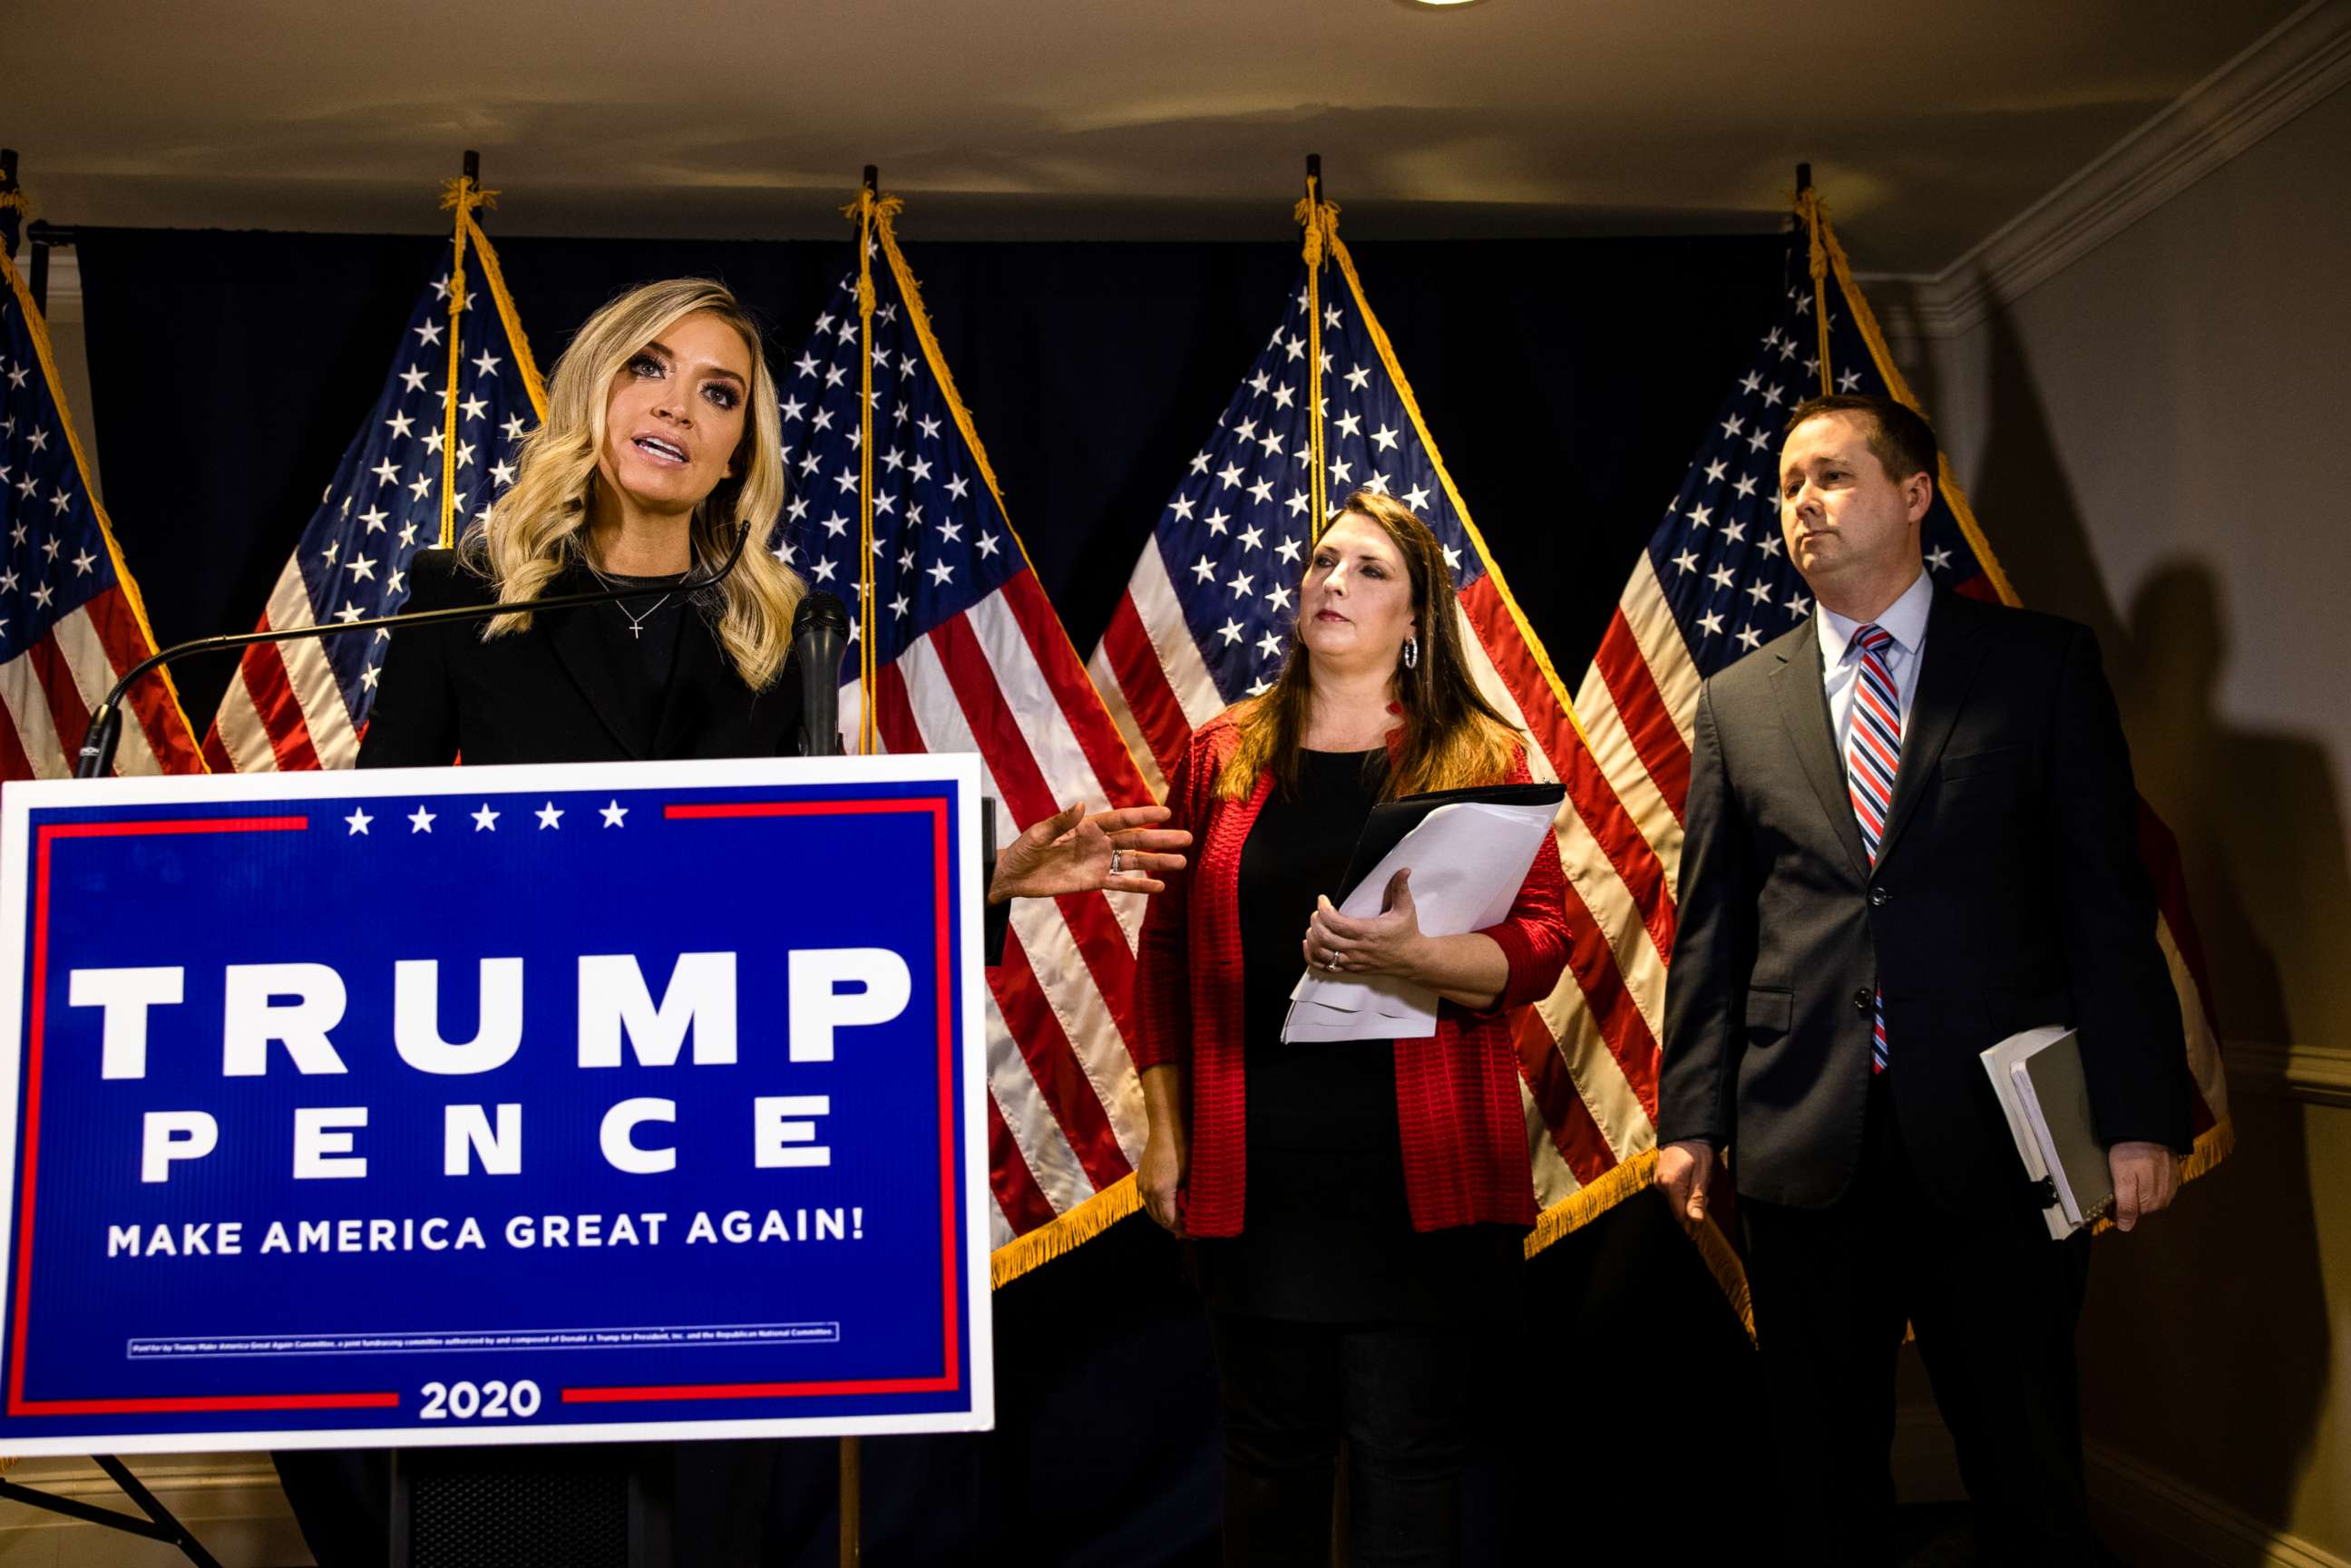 PHOTO: White House Press Secretary Kayleigh McEnany speaks during a press conference with RNC Chairwoman Ronna McDaniel at the Republican National Committee headquarters on Nov. 9, 2020 in Washington.